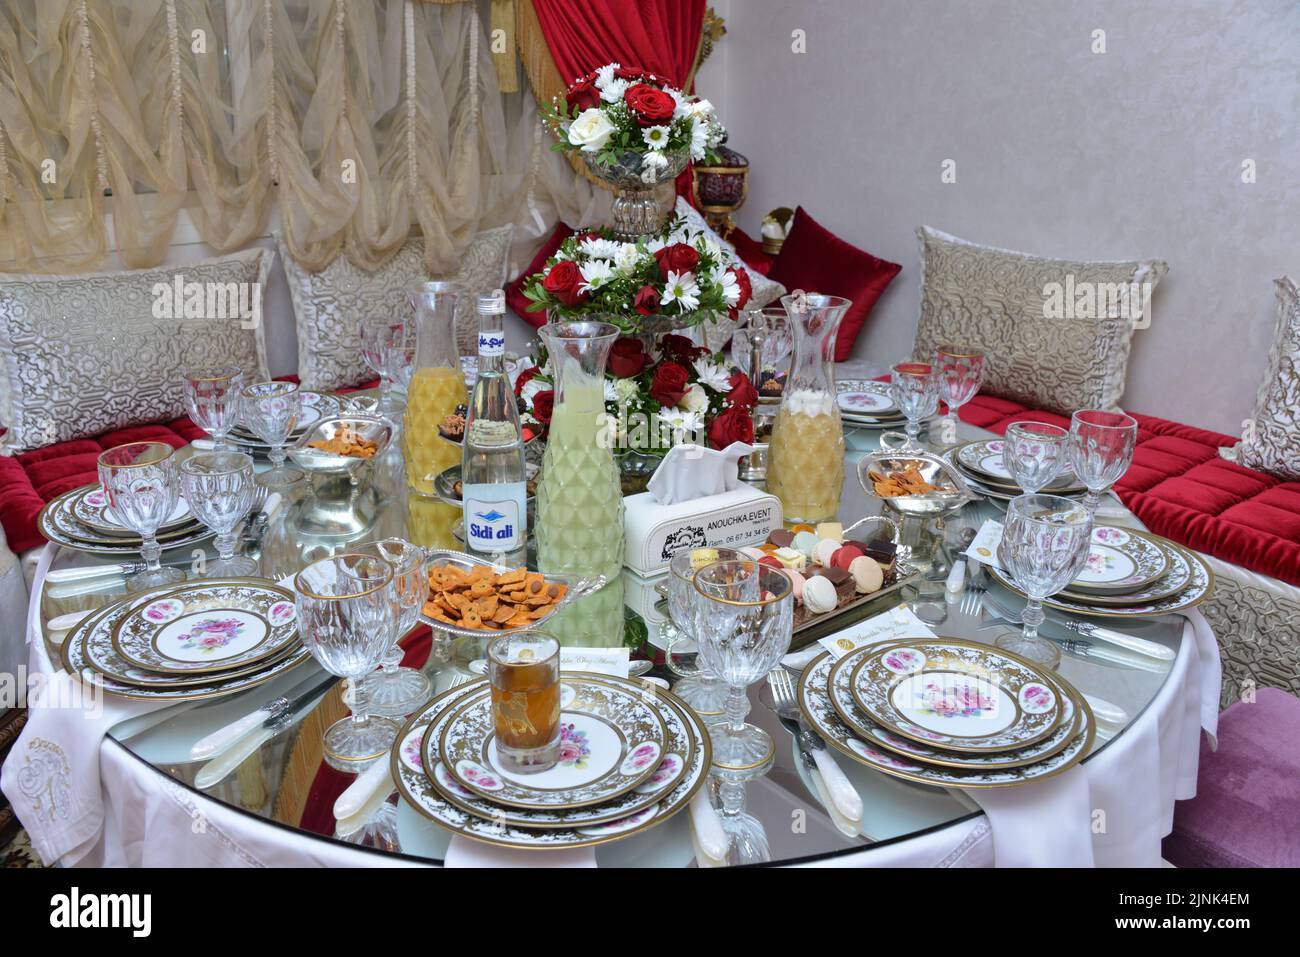 Moroccan salon with wedding table plates, cups and chairs Stock Photo